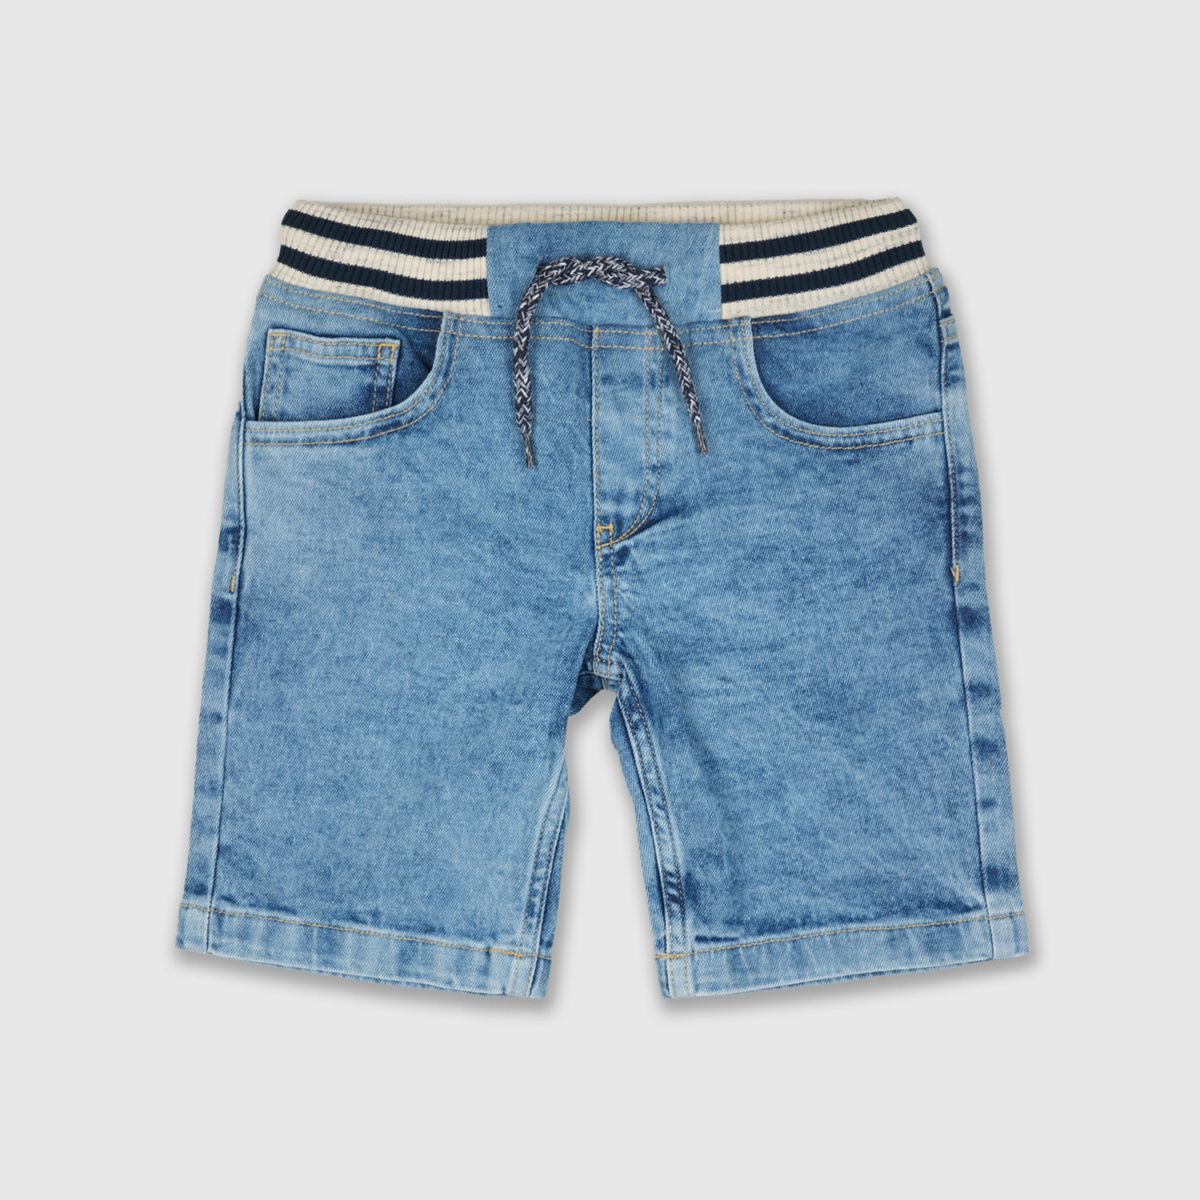 UNITED COLORS OF BENETTON Boys Solid Woven Denim Shorts